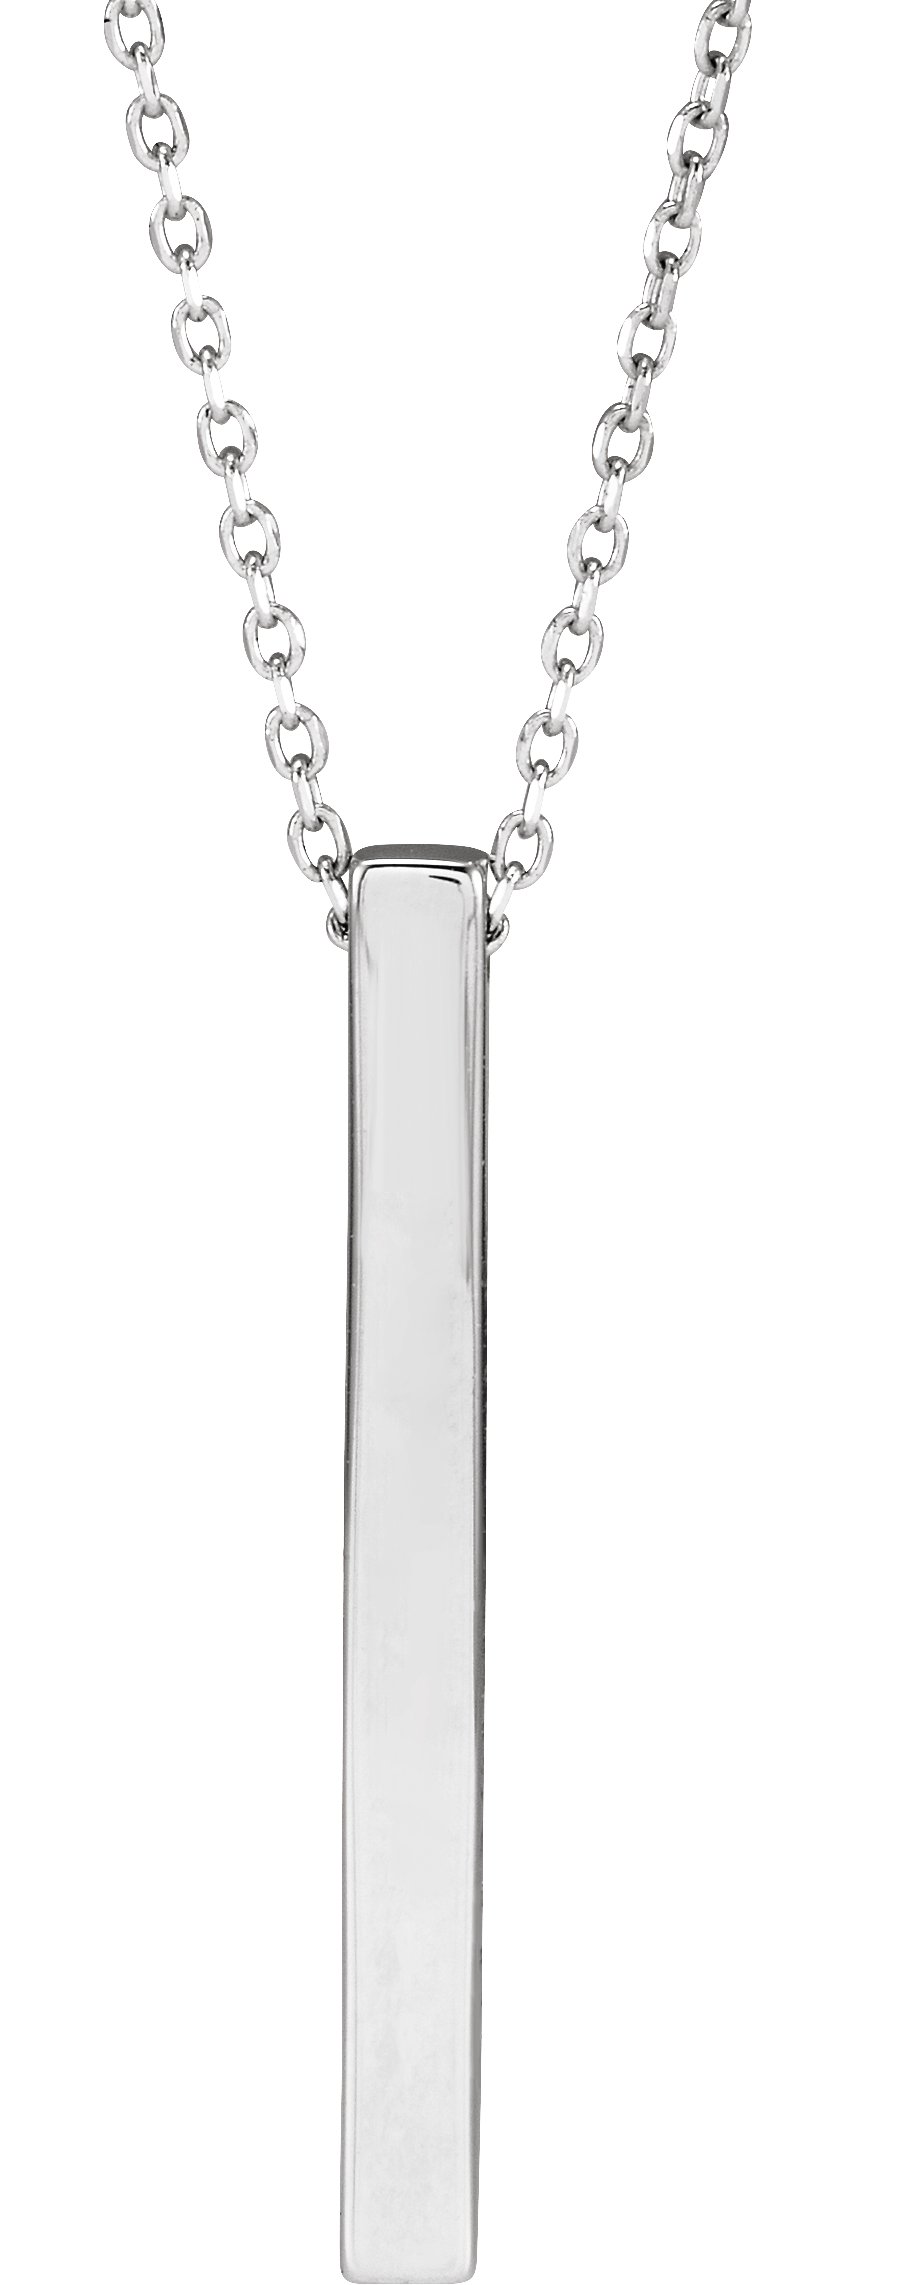 14K White Engravable Four-Sided Bar 16-18" Necklace